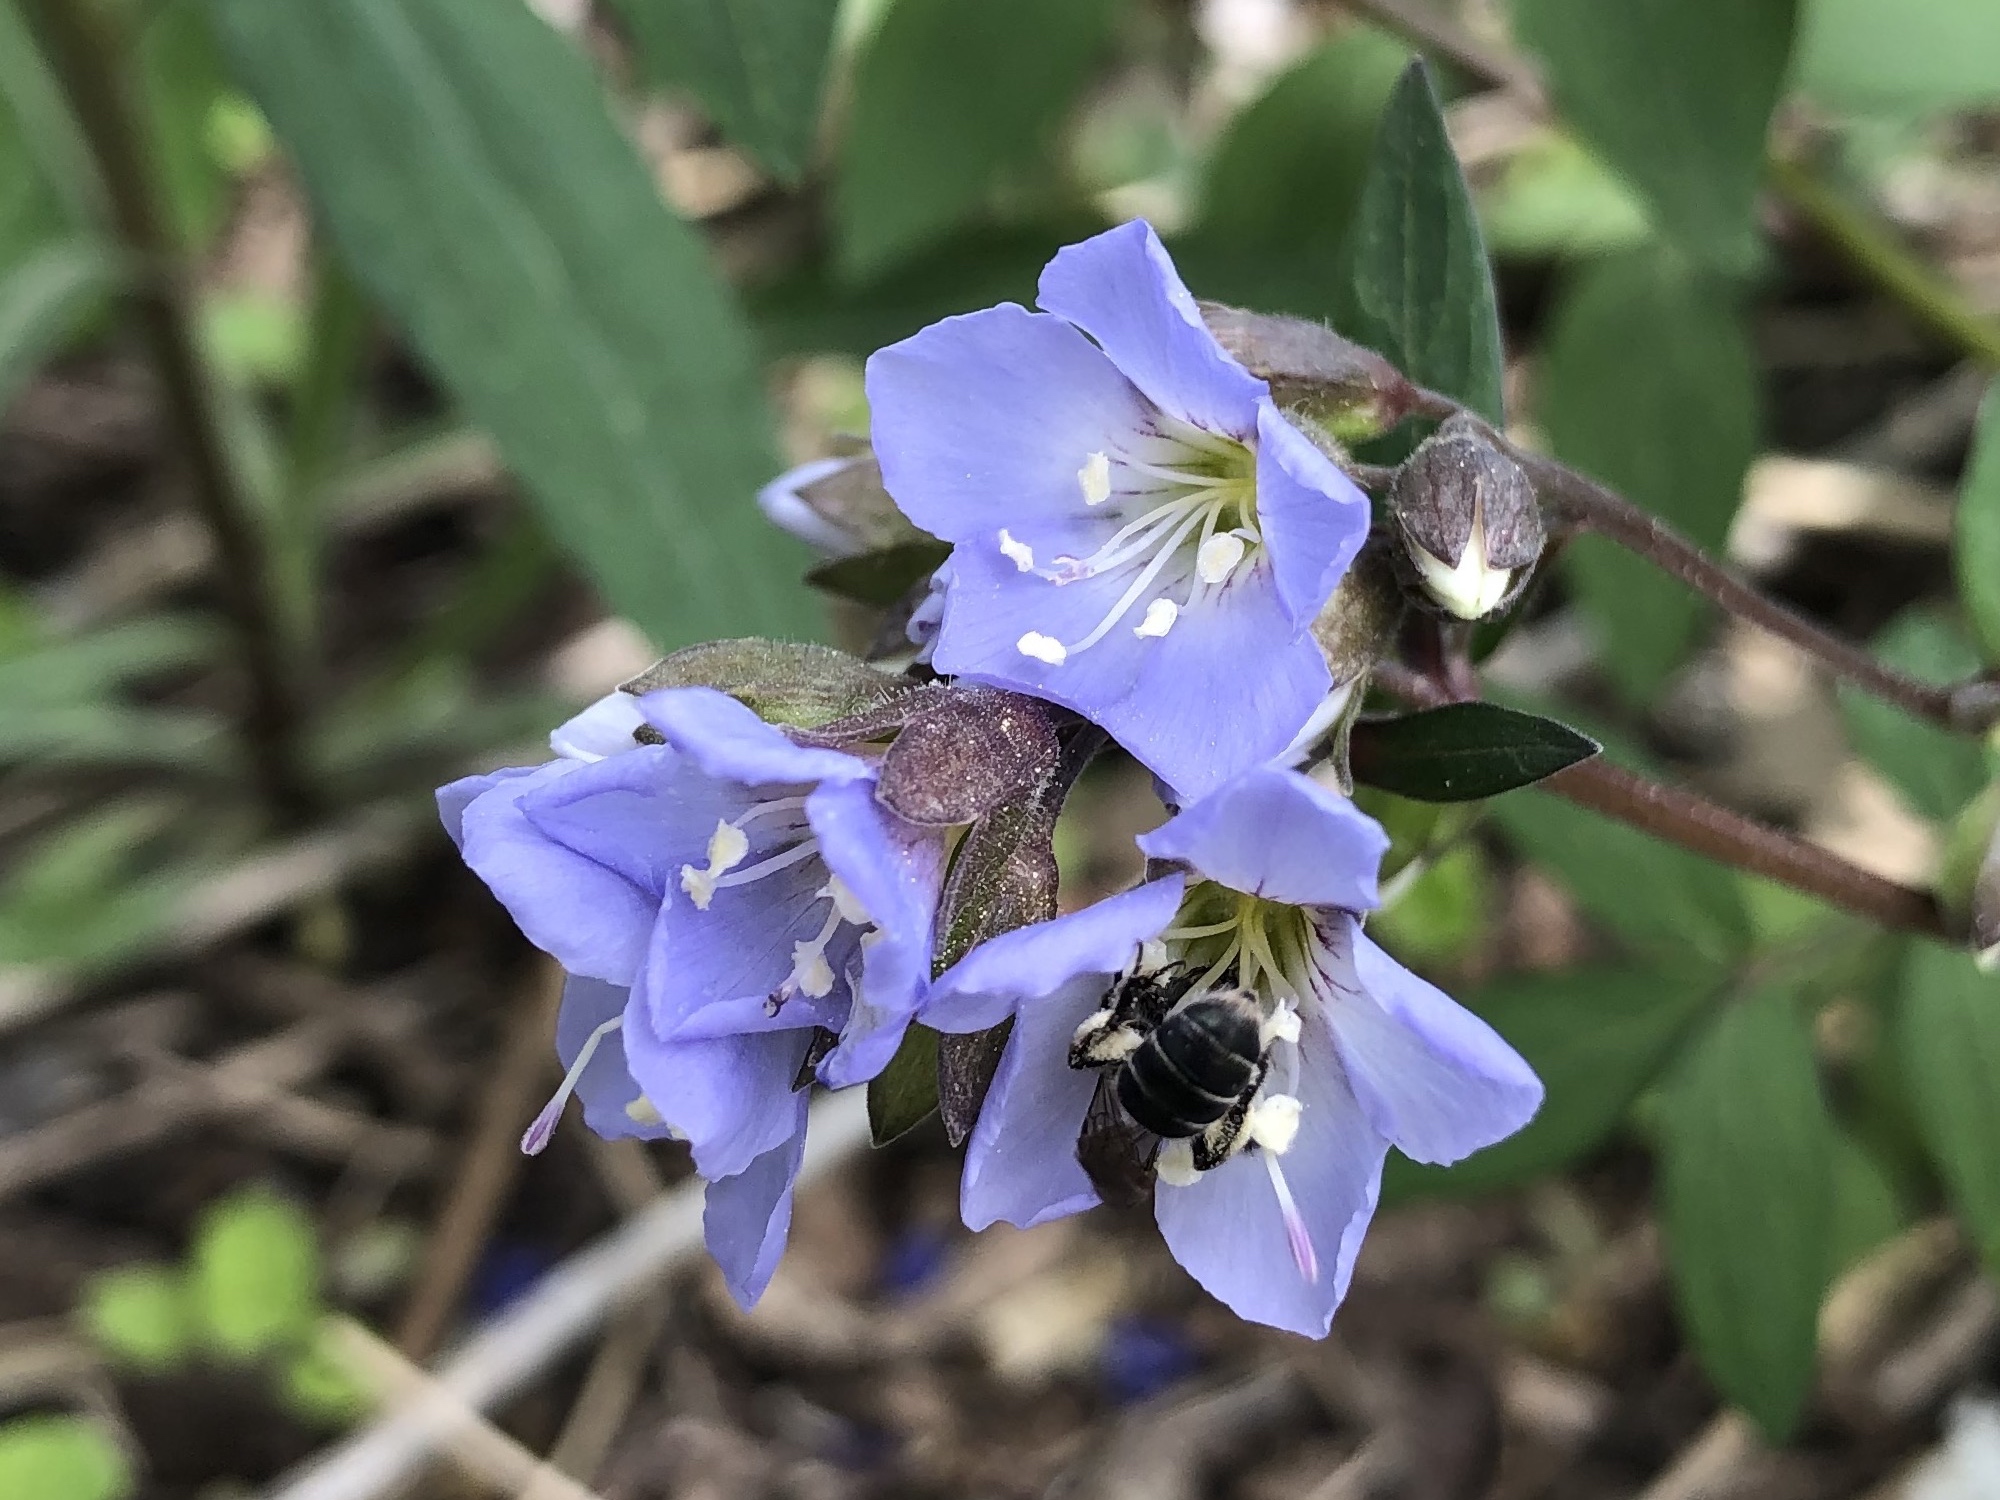 Sweat Bee on Jacob's Ladder on May 2, 2021.